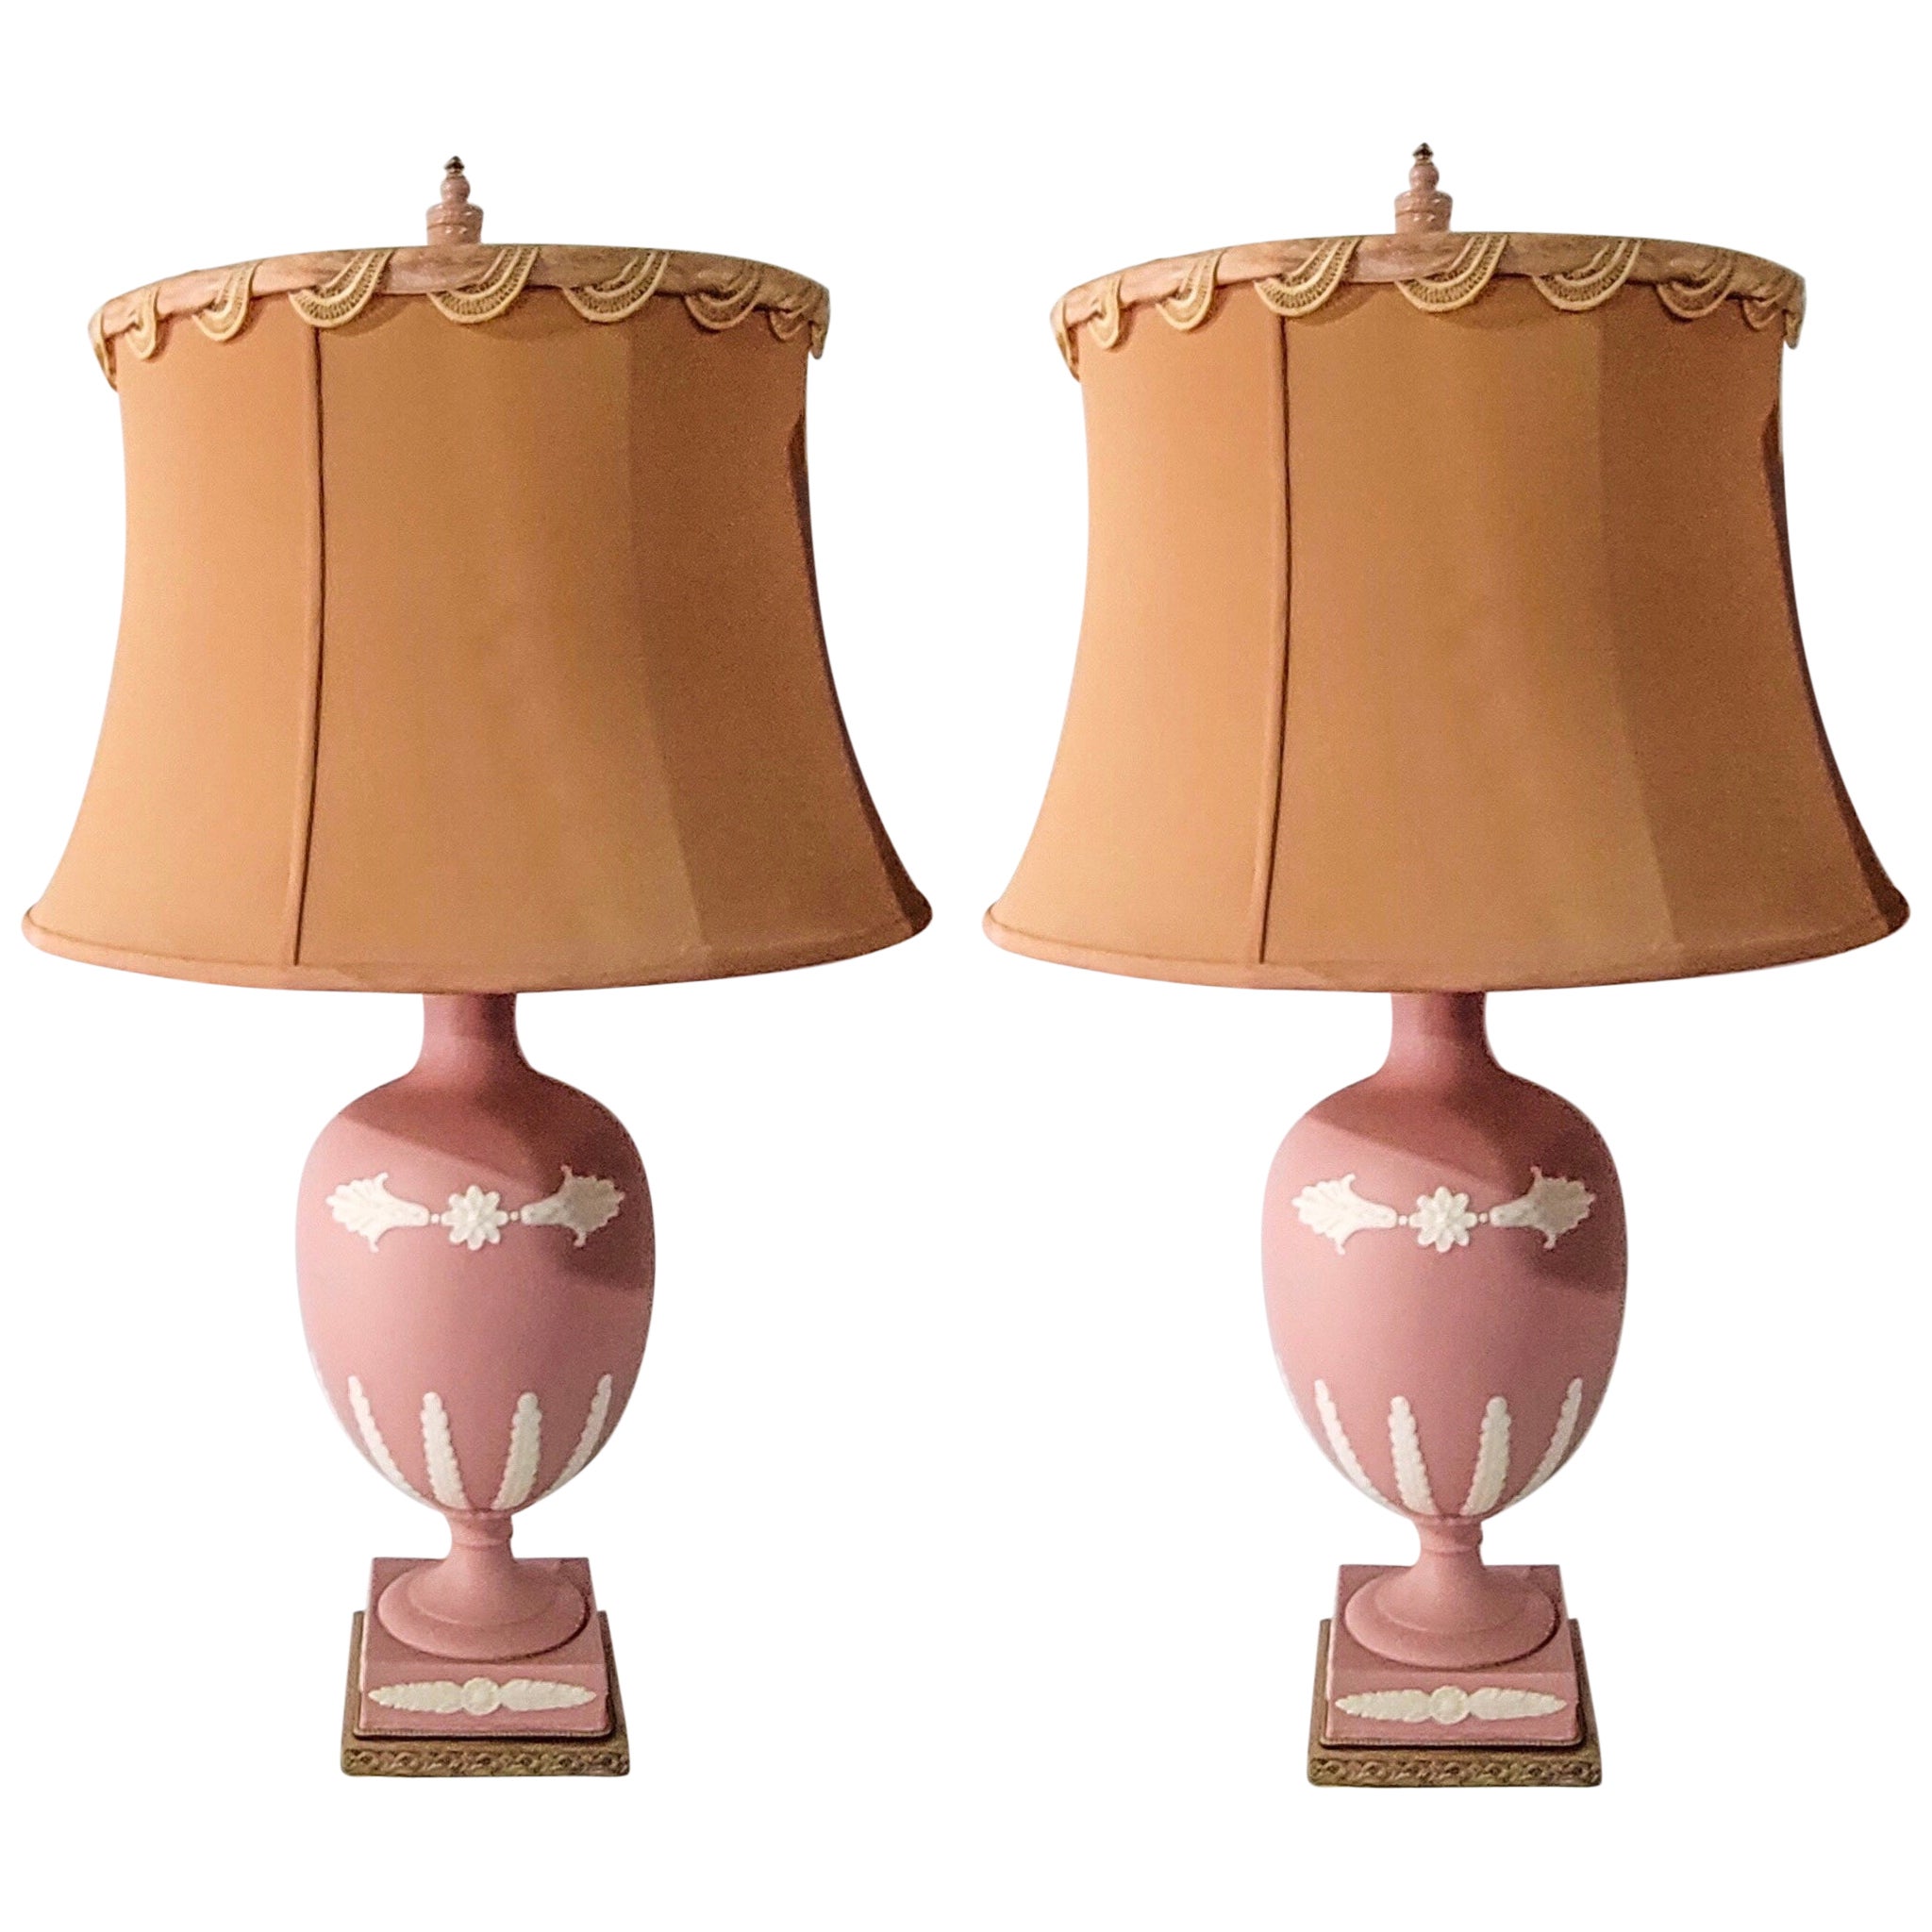 1950s Neoclassical Style Pink Basalt Pottery Lamps Att. to Wedgwood, Pair